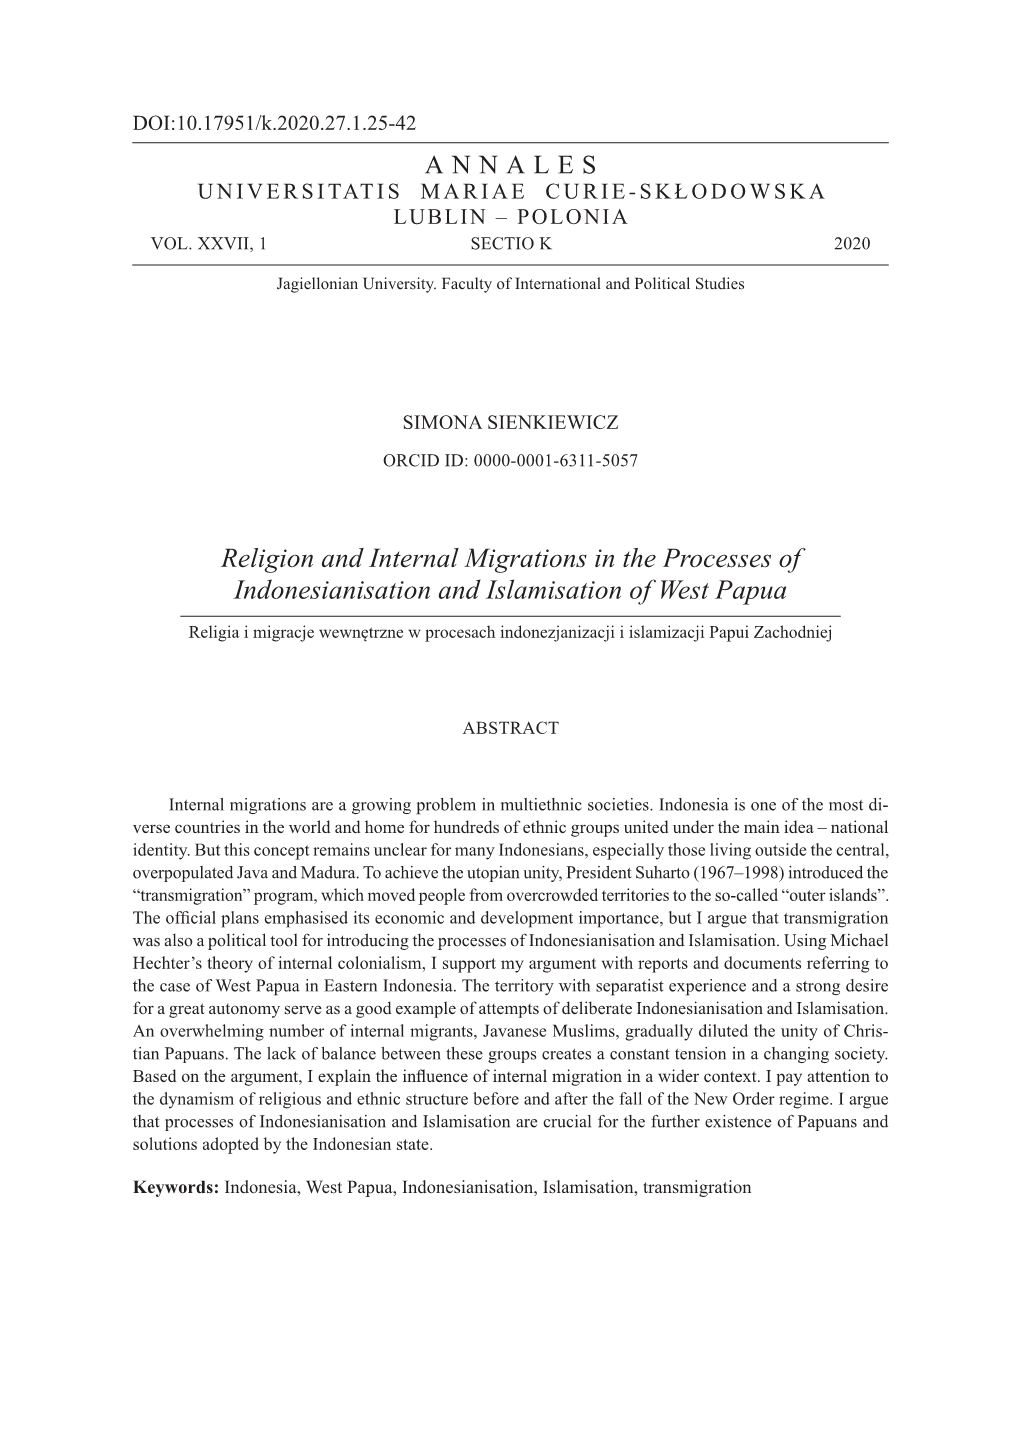 Religion and Internal Migrations in the Processes of Indonesianisation and Islamisation of West Papua